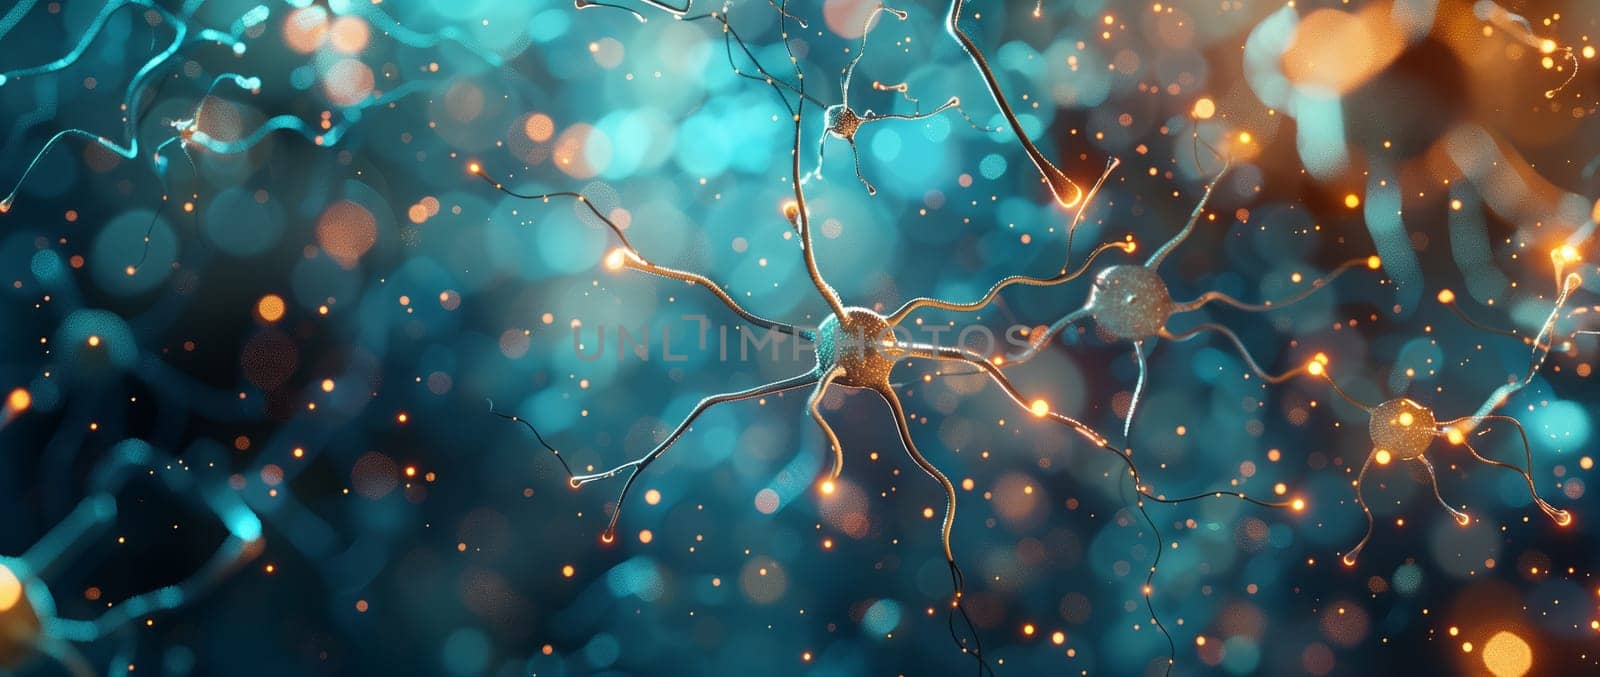 Macro photography of an electric blue nerve cell in the brain by richwolf